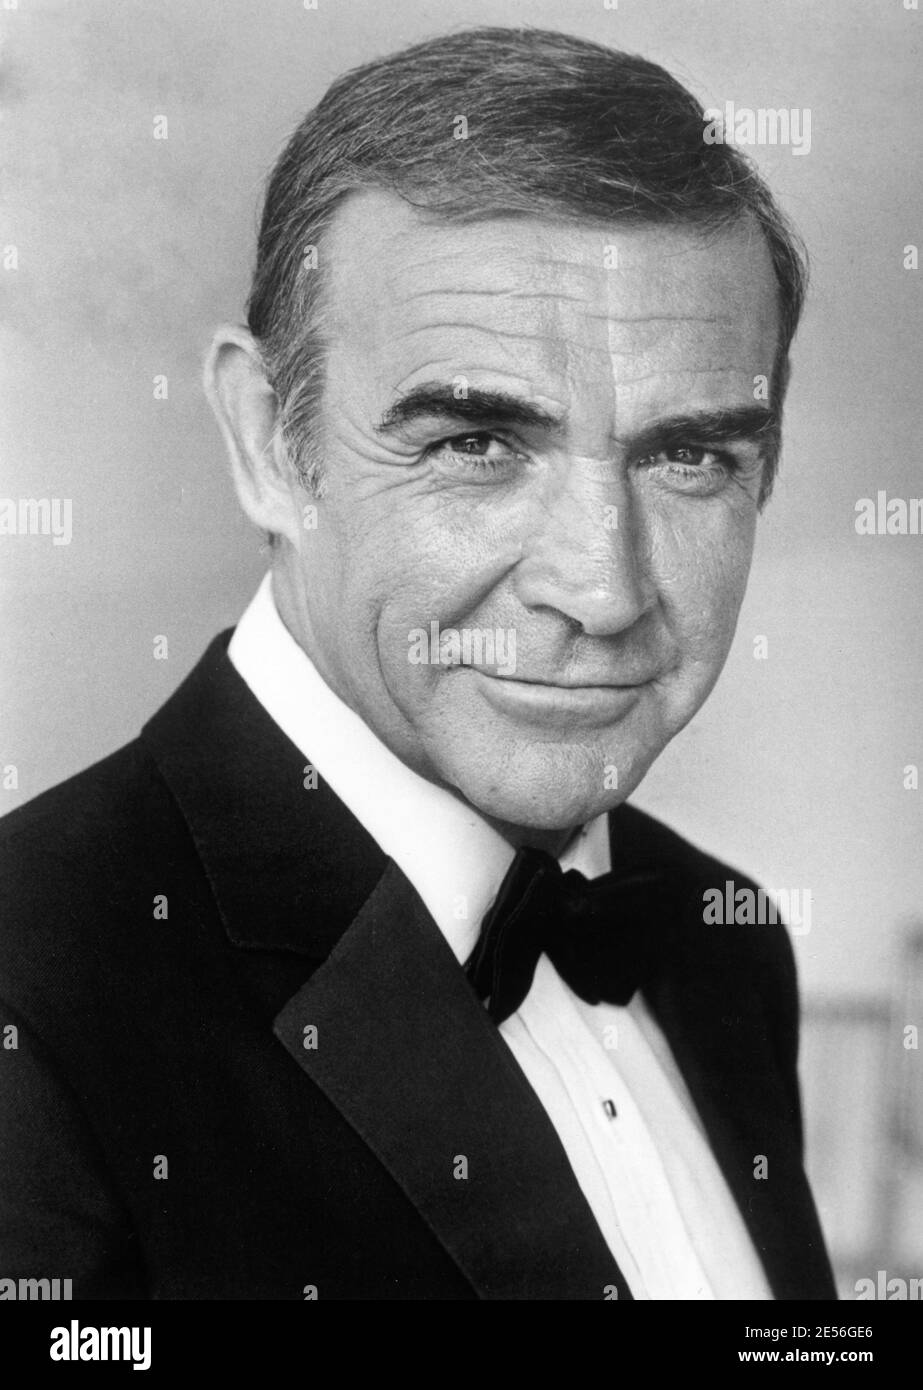 SEAN CONNERY Portrait as James Bond 007 in NEVER SAY NEVER AGAIN 1983 director IRVIN KERSHNER executive producer Kevin McClory UK / USA / West Germany Talia Film II Productions / Woodcote / Producers Sales Organisation (PSO) / Warner Bros. Stock Photo